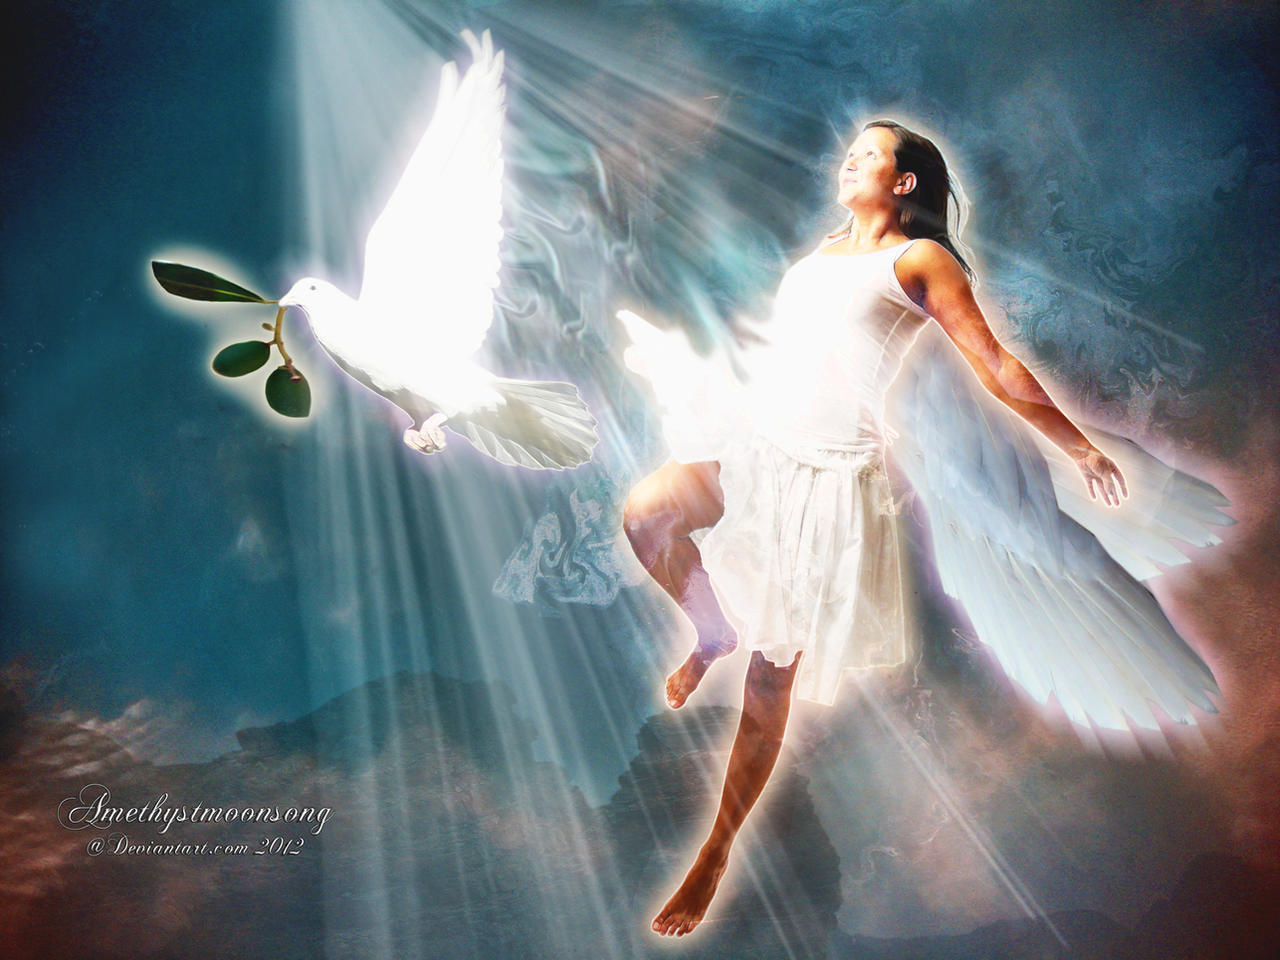 when_angels_fly___there_is_peace_by_amethystmstock-d5ave7u.jpg